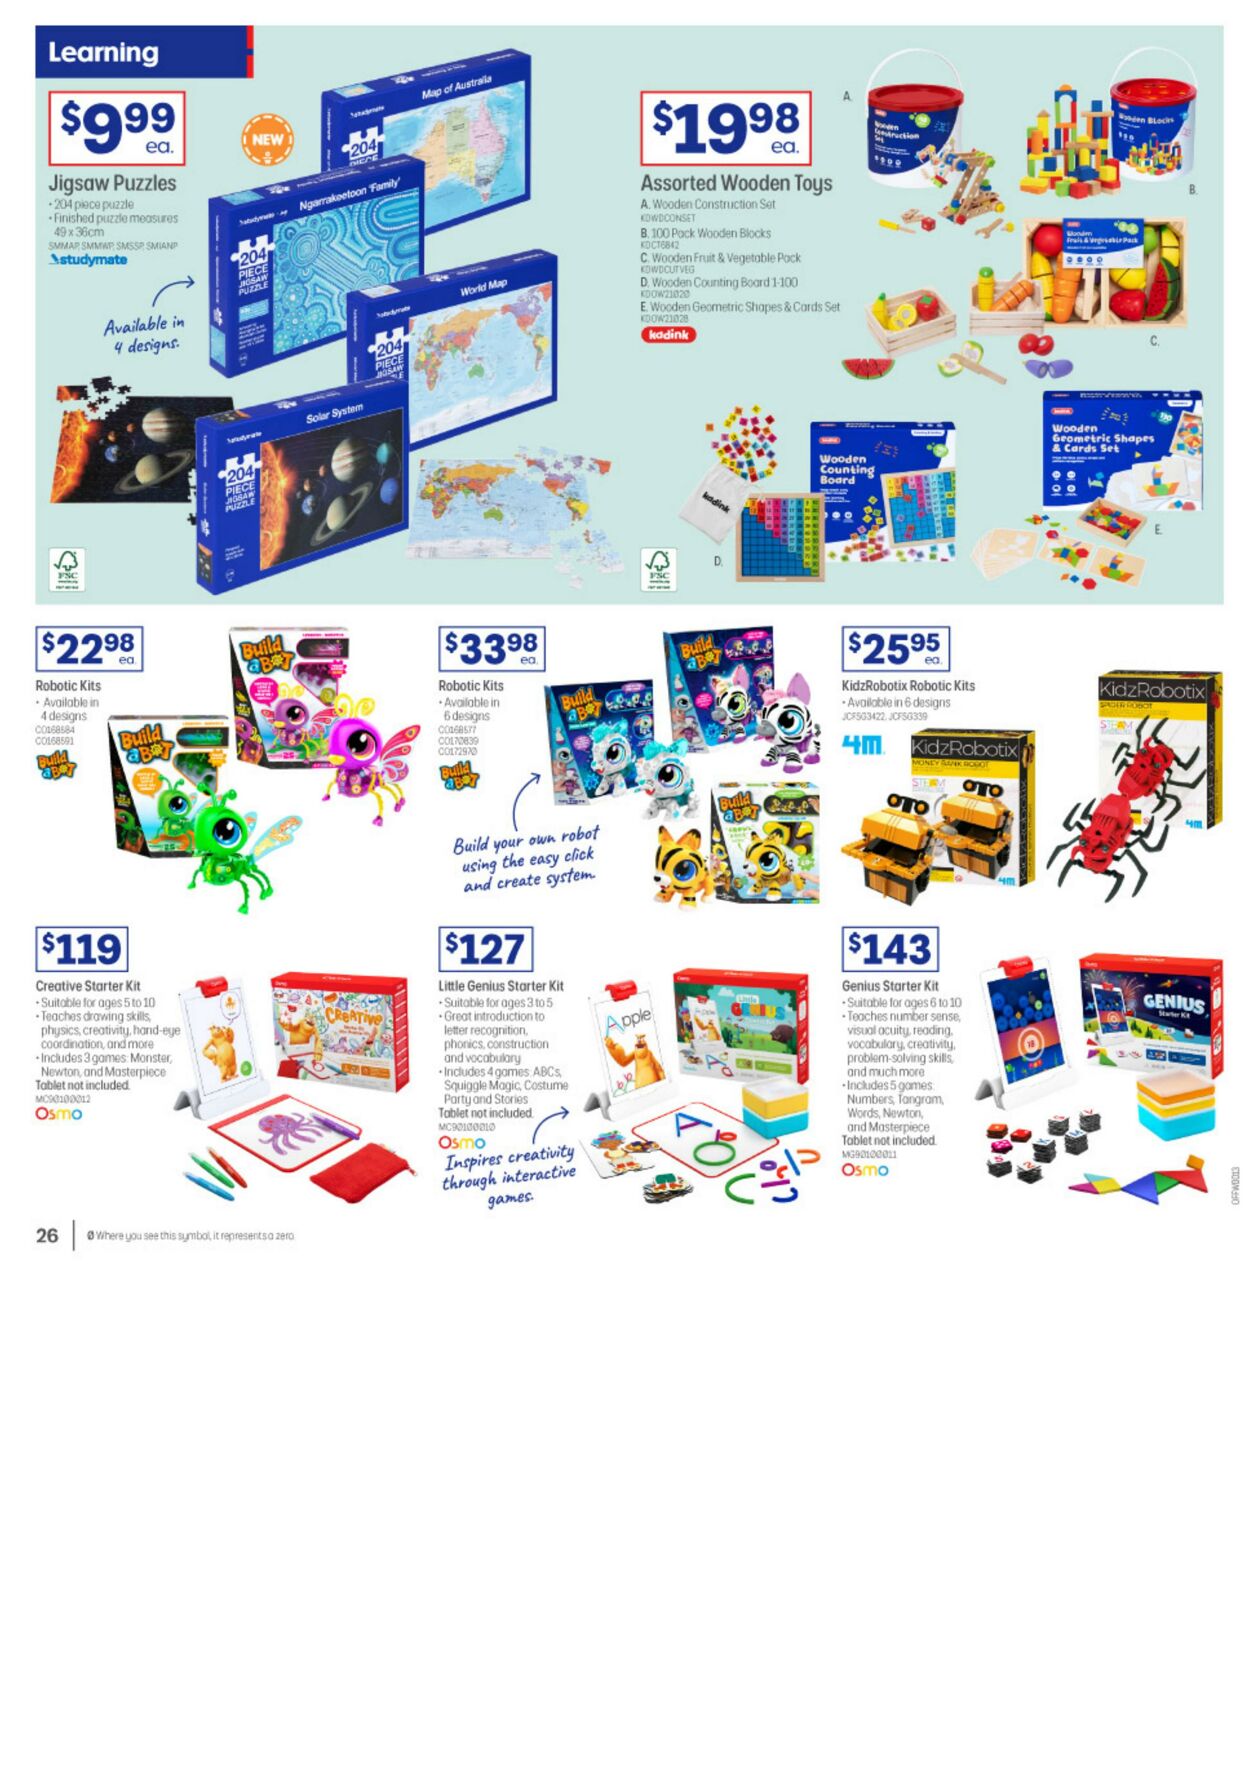 Catalogue Officeworks 03.11.2022 - 17.11.2022